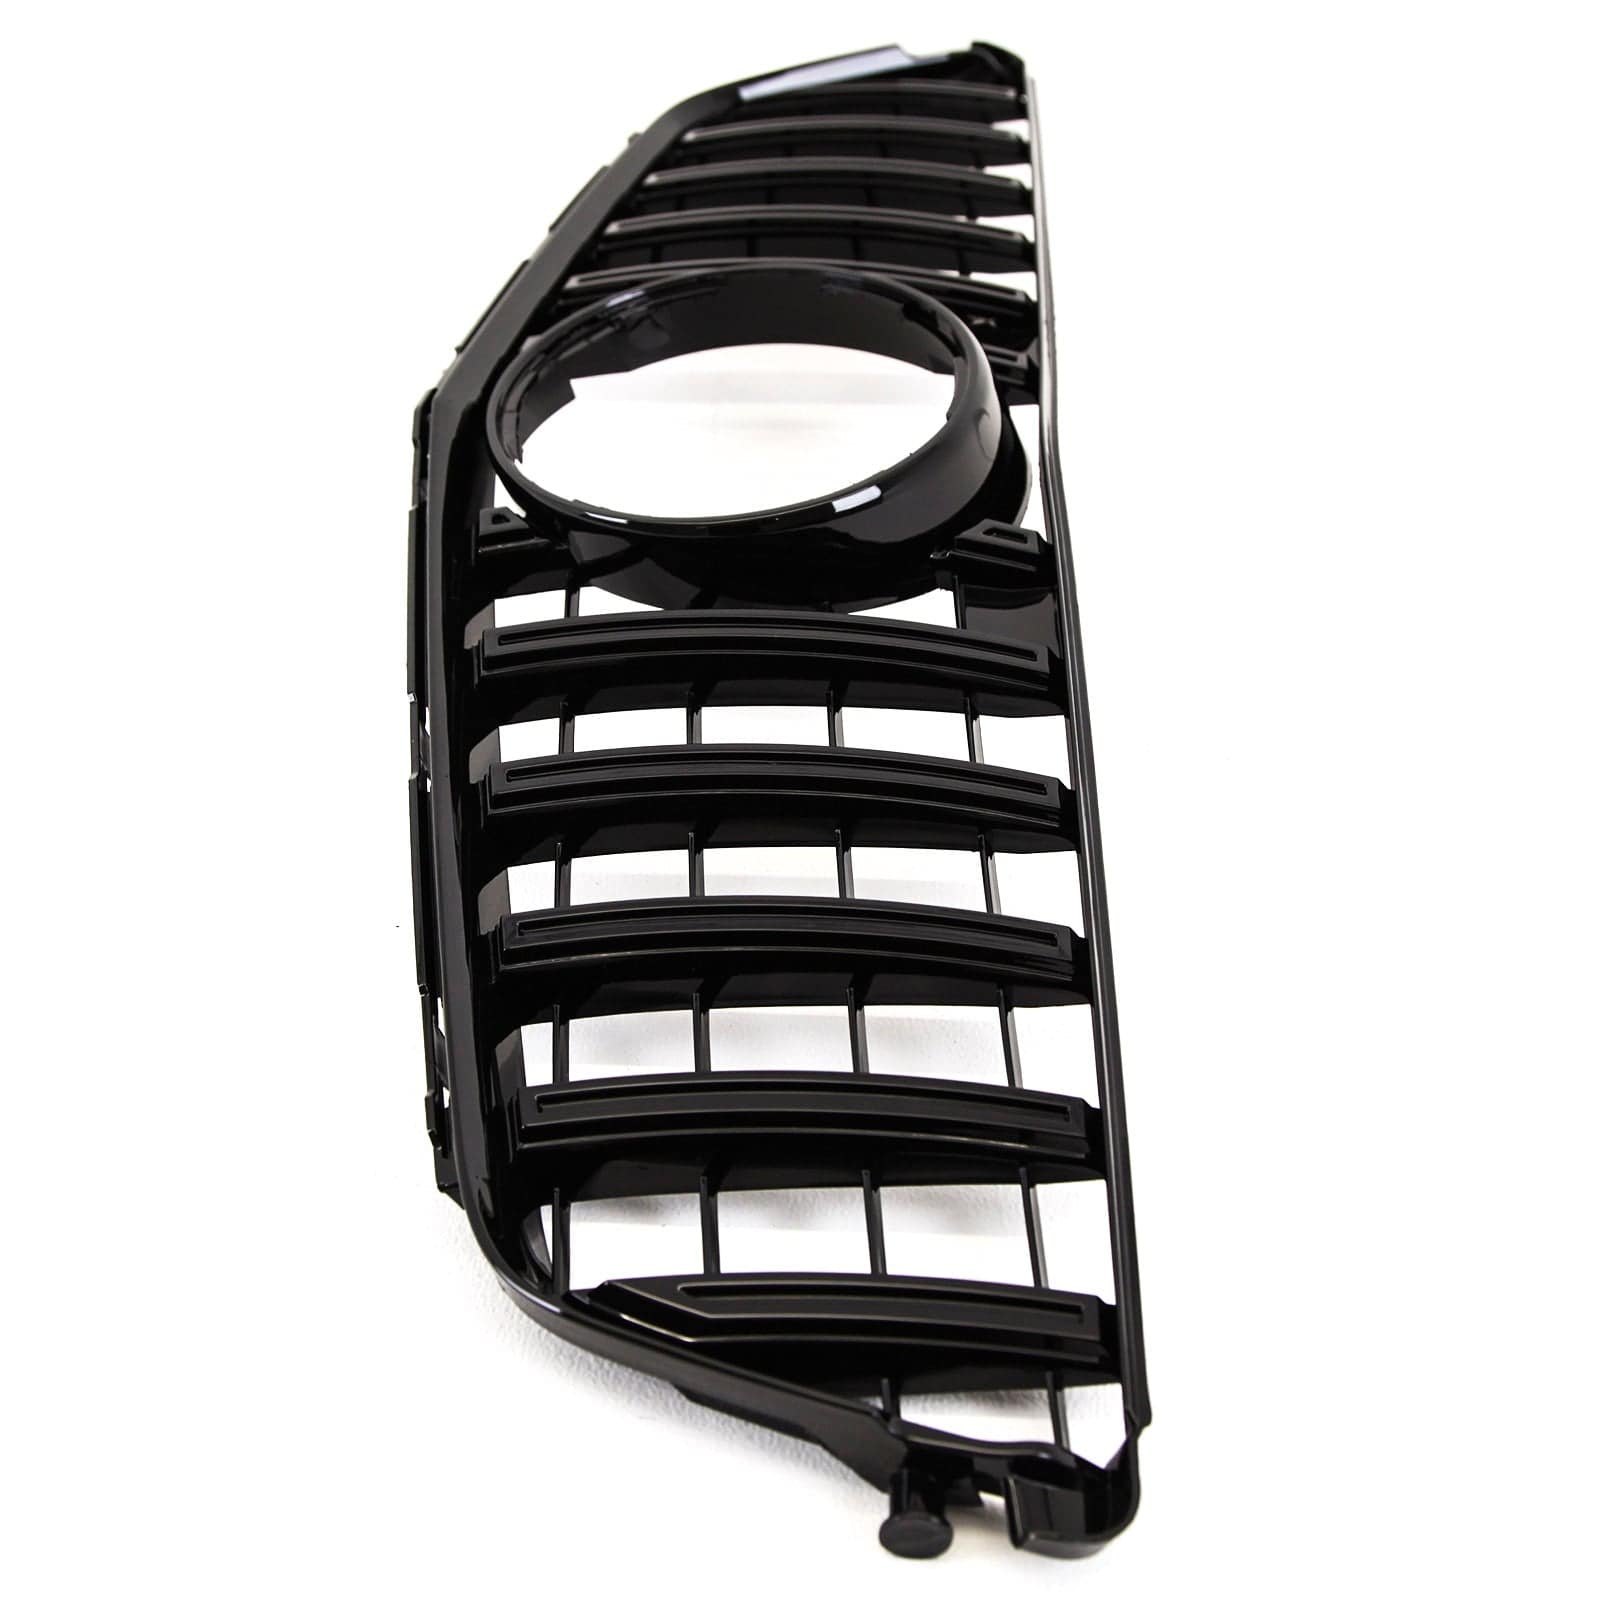 For BENZ 08-14 W204 C-Sedan SL-C Tuning Front Frame Grille All Gloss Black  Color